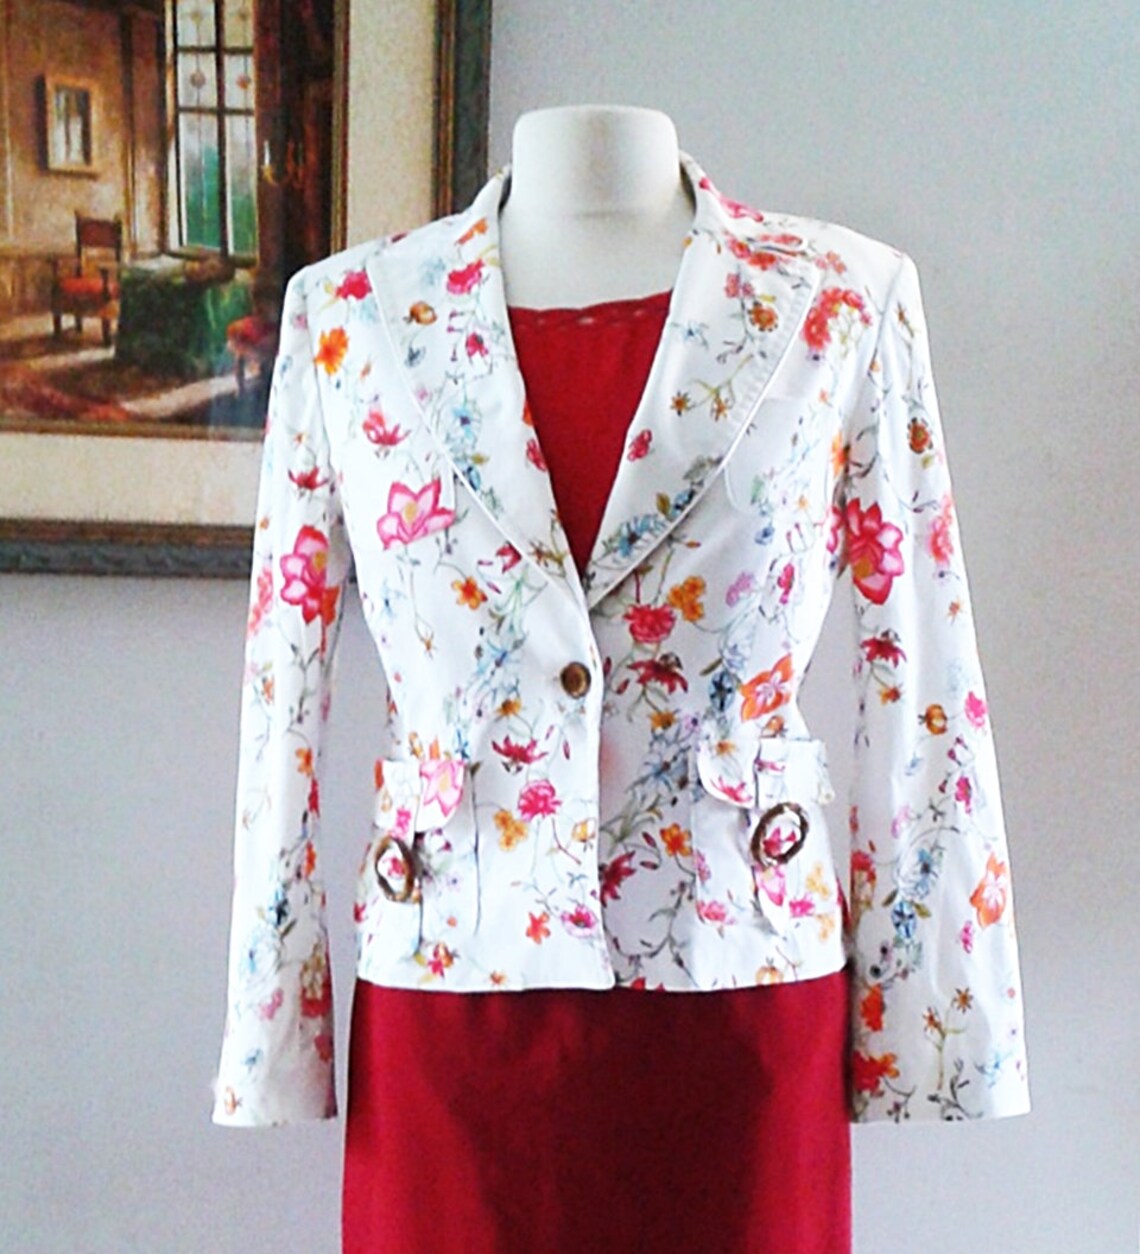 White Floral Patterned Cotton Jacket - Etsy